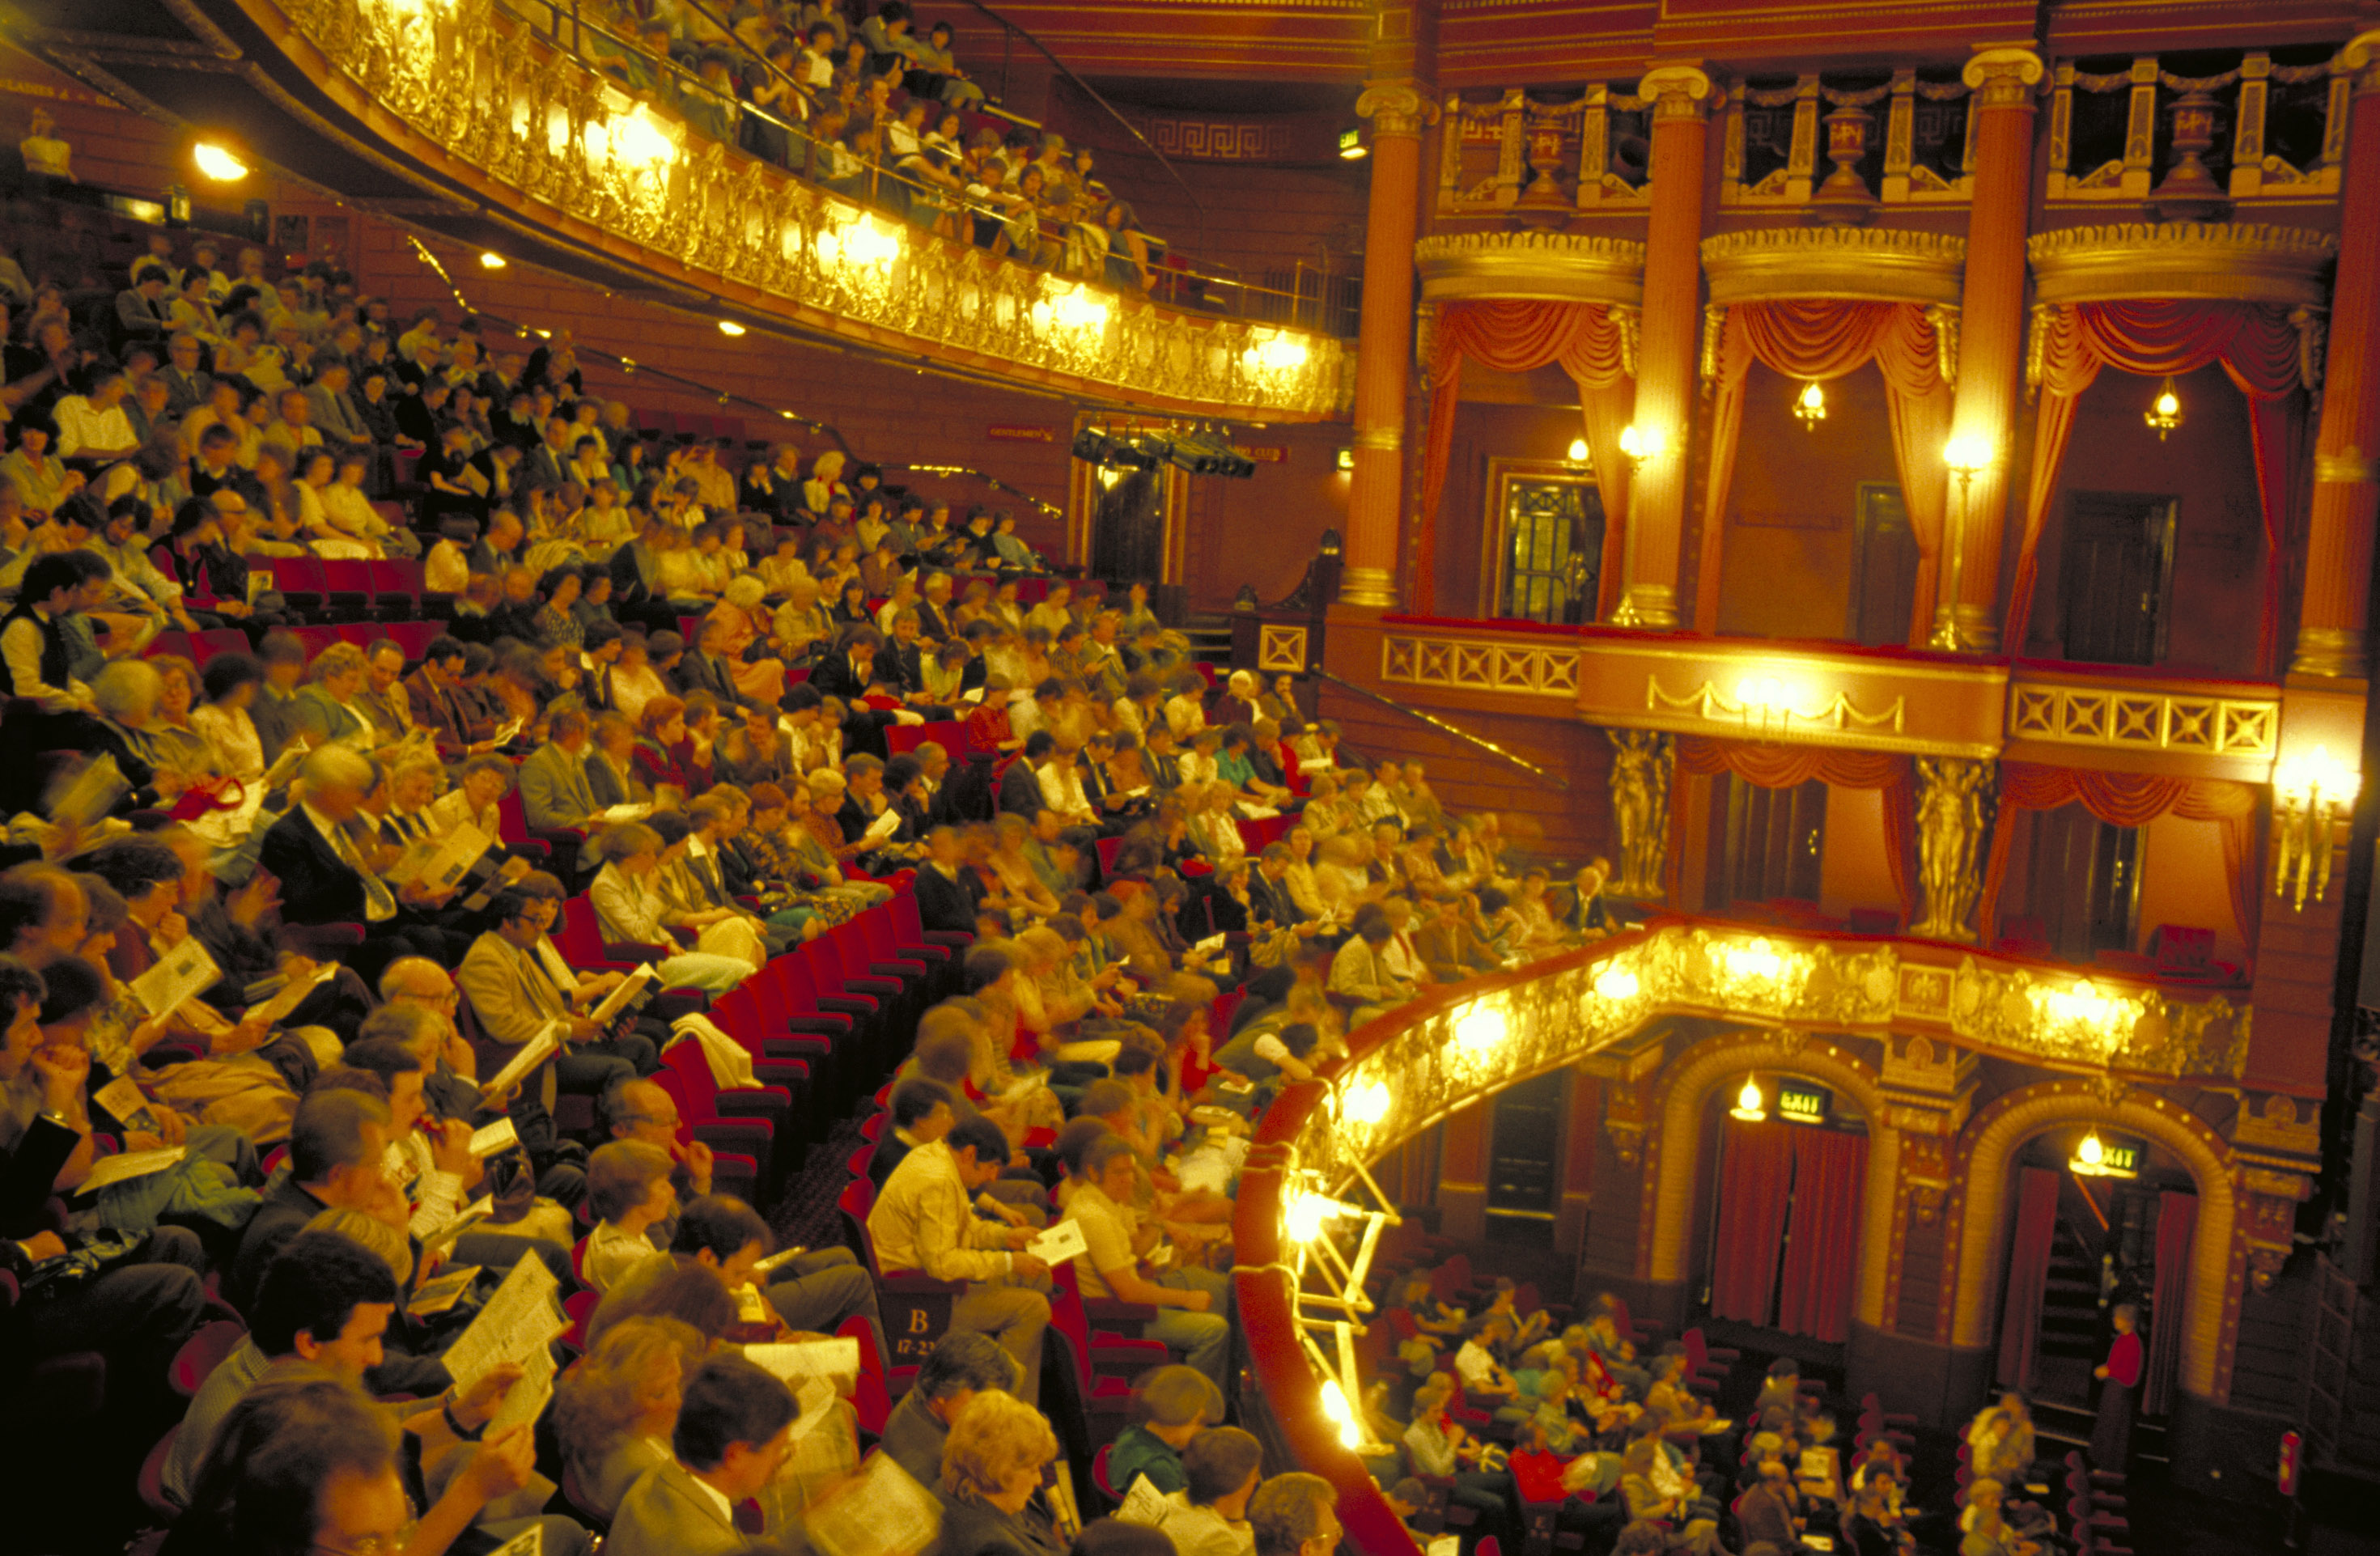 Weekend theater. West end Theatre. Великобритании театры и кинотеатры. "The Palace of Arts" ивановоdrama Theatre, the Musical Theatre and the Puppet Theatre. British Theatre and Music.